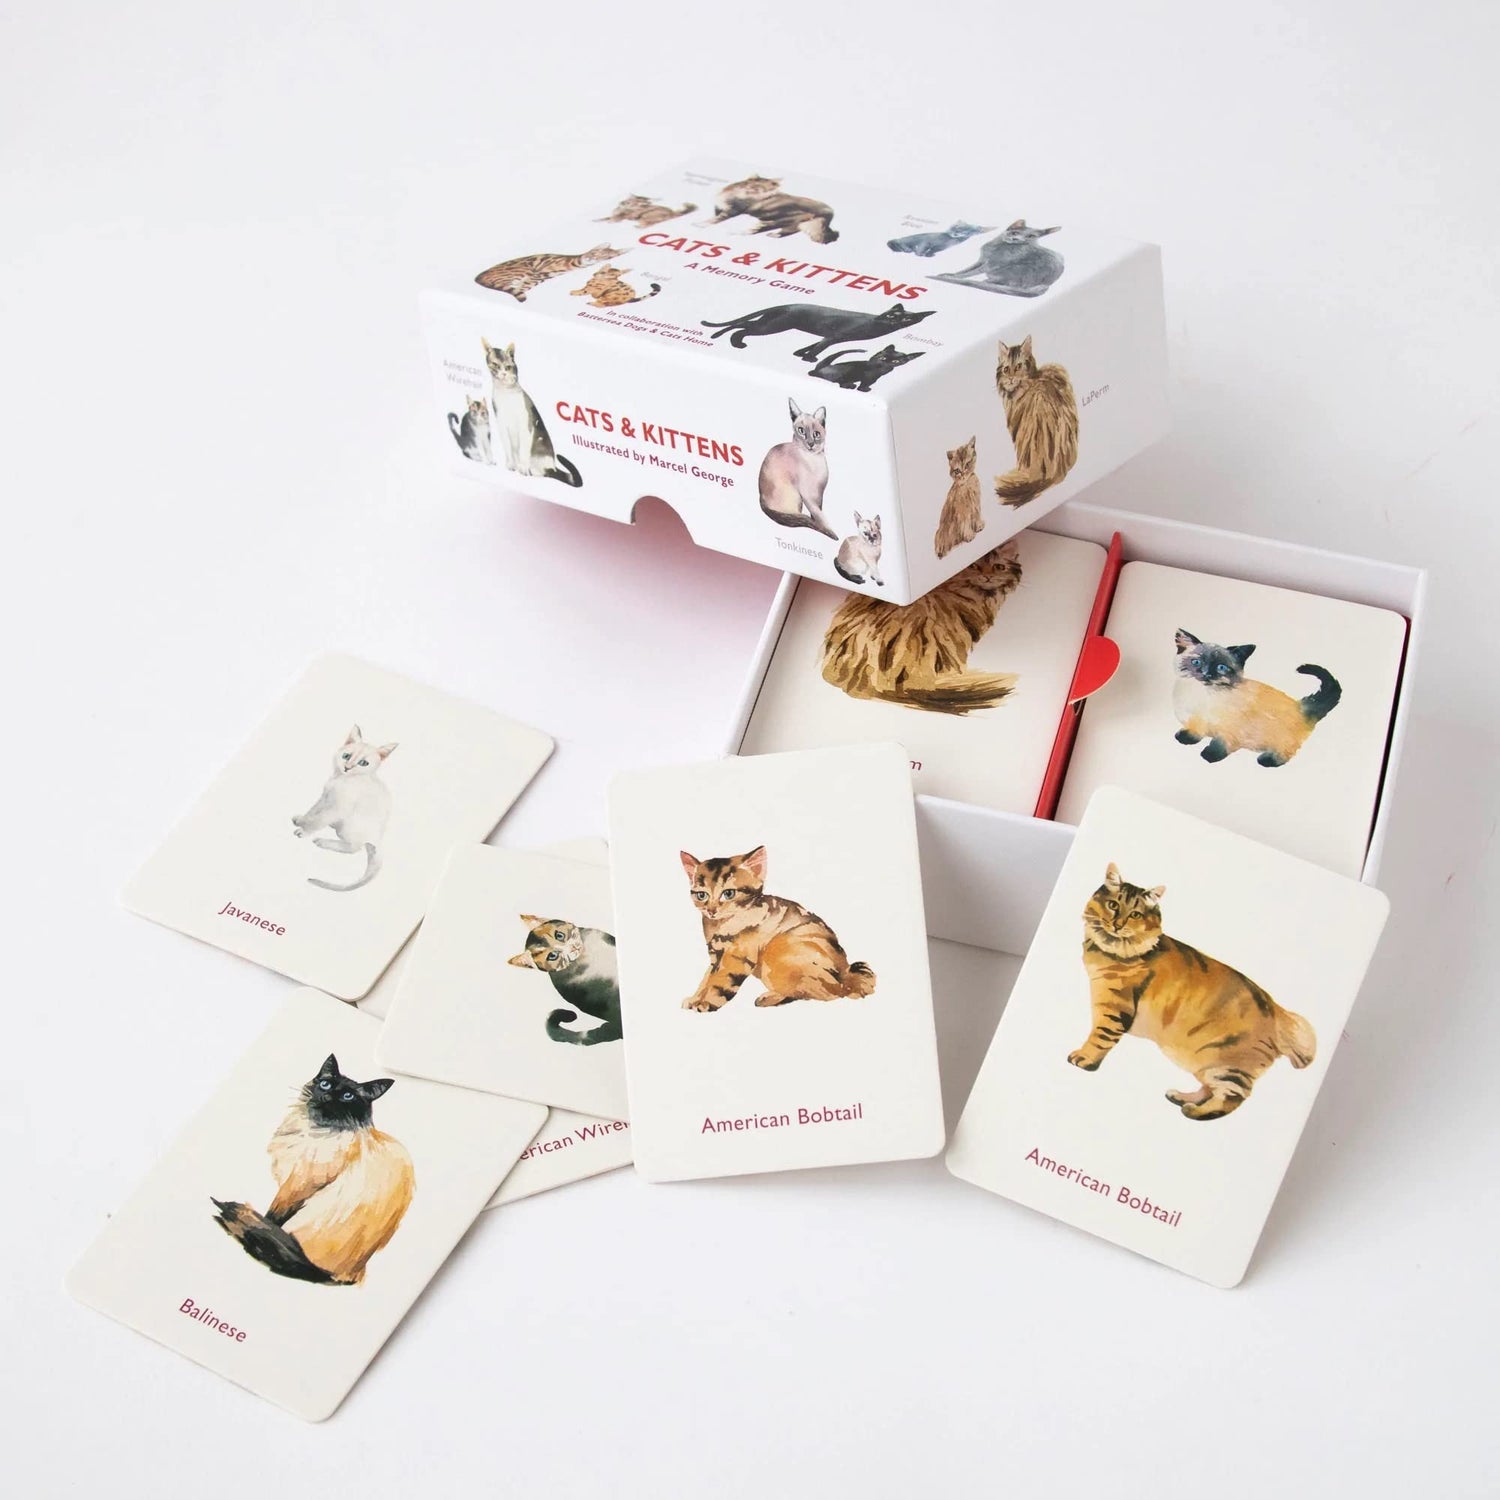 A memory game titled &quot;Cats &amp; Kittens: A Memory Game&quot; featuring illustrations of various cat breeds such as Norwegian Forest, Russian Blue, Bengal, and Bombay. This educational game is designed to enhance memory skills while introducing players.
Brand Name: Chronicle Books